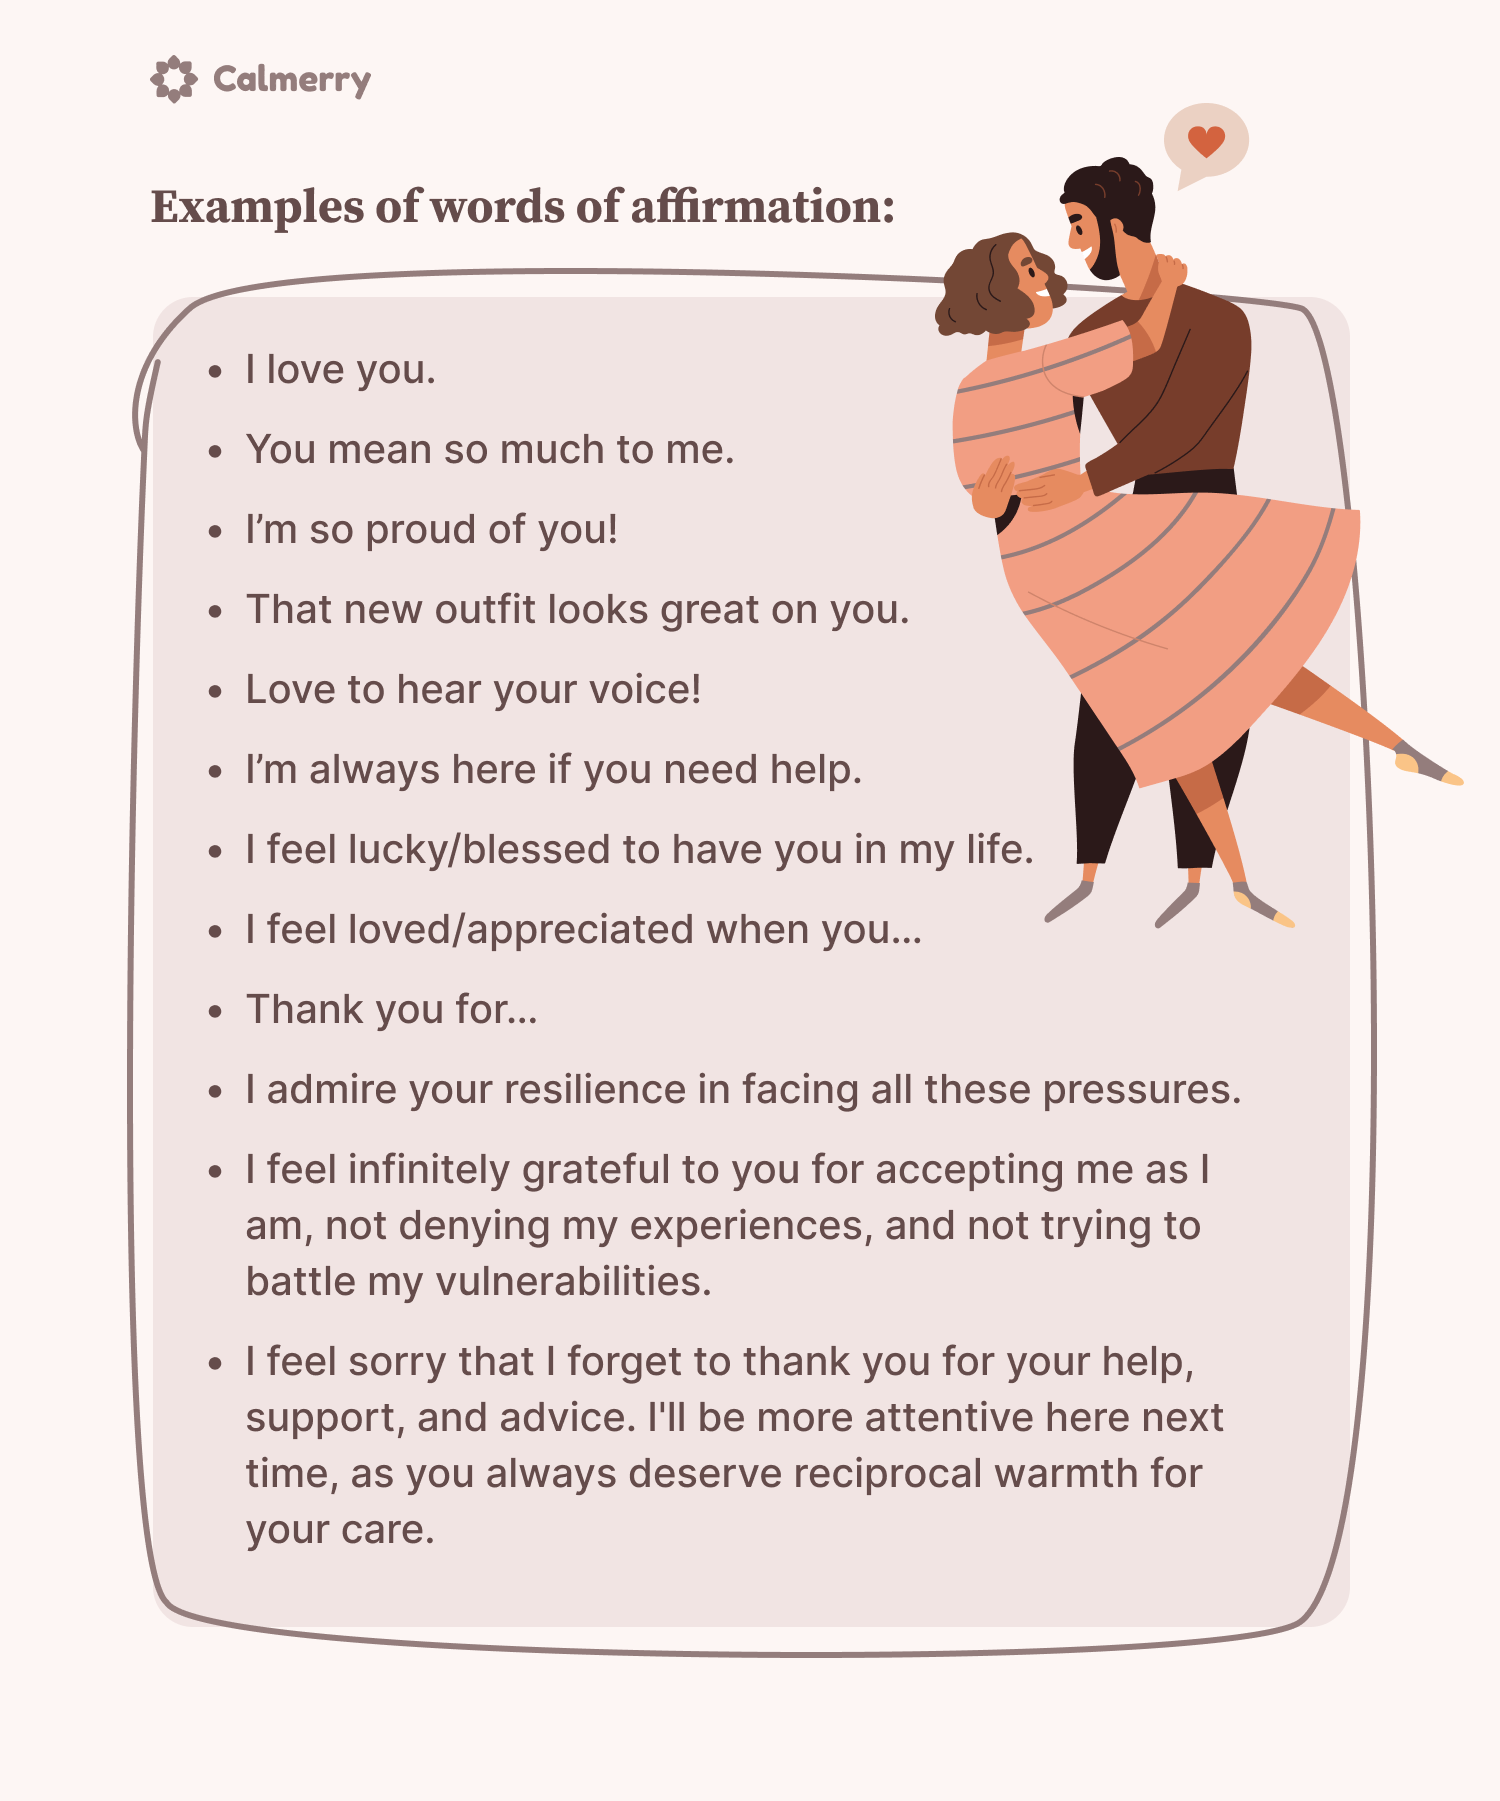 Examples of words of affirmation list